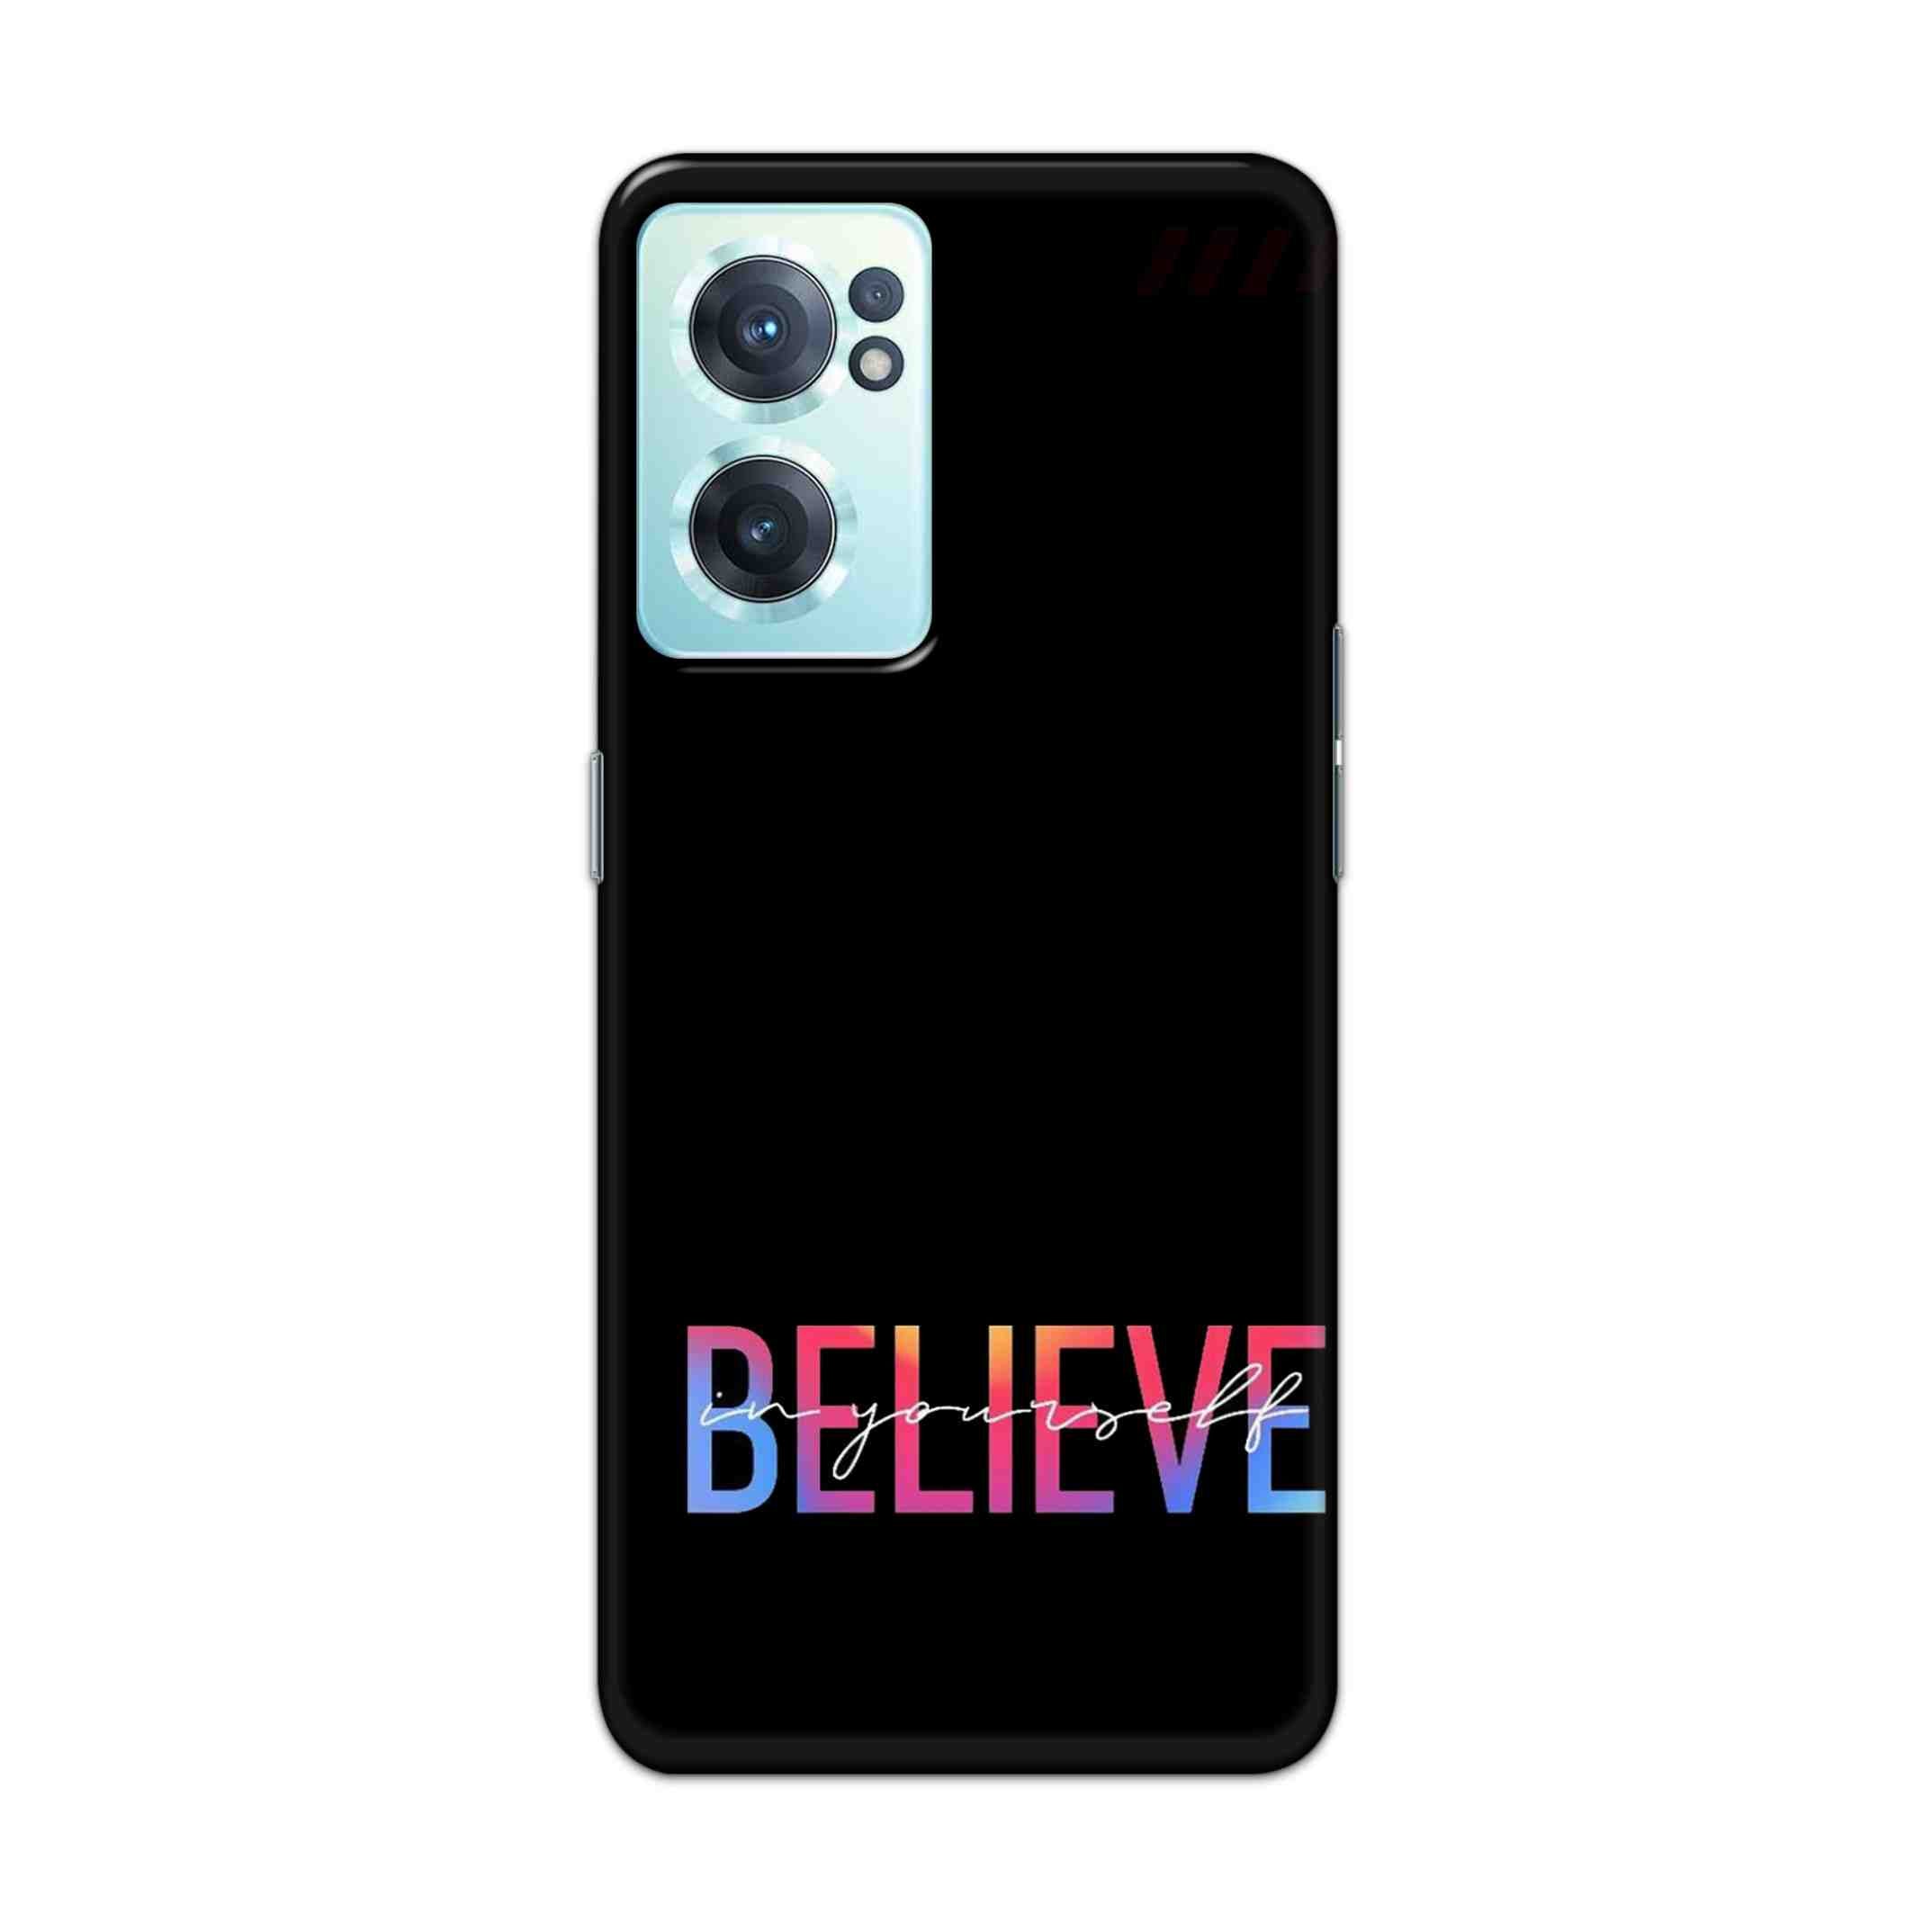 Buy Believe Hard Back Mobile Phone Case Cover For OnePlus Nord CE 2 5G Online